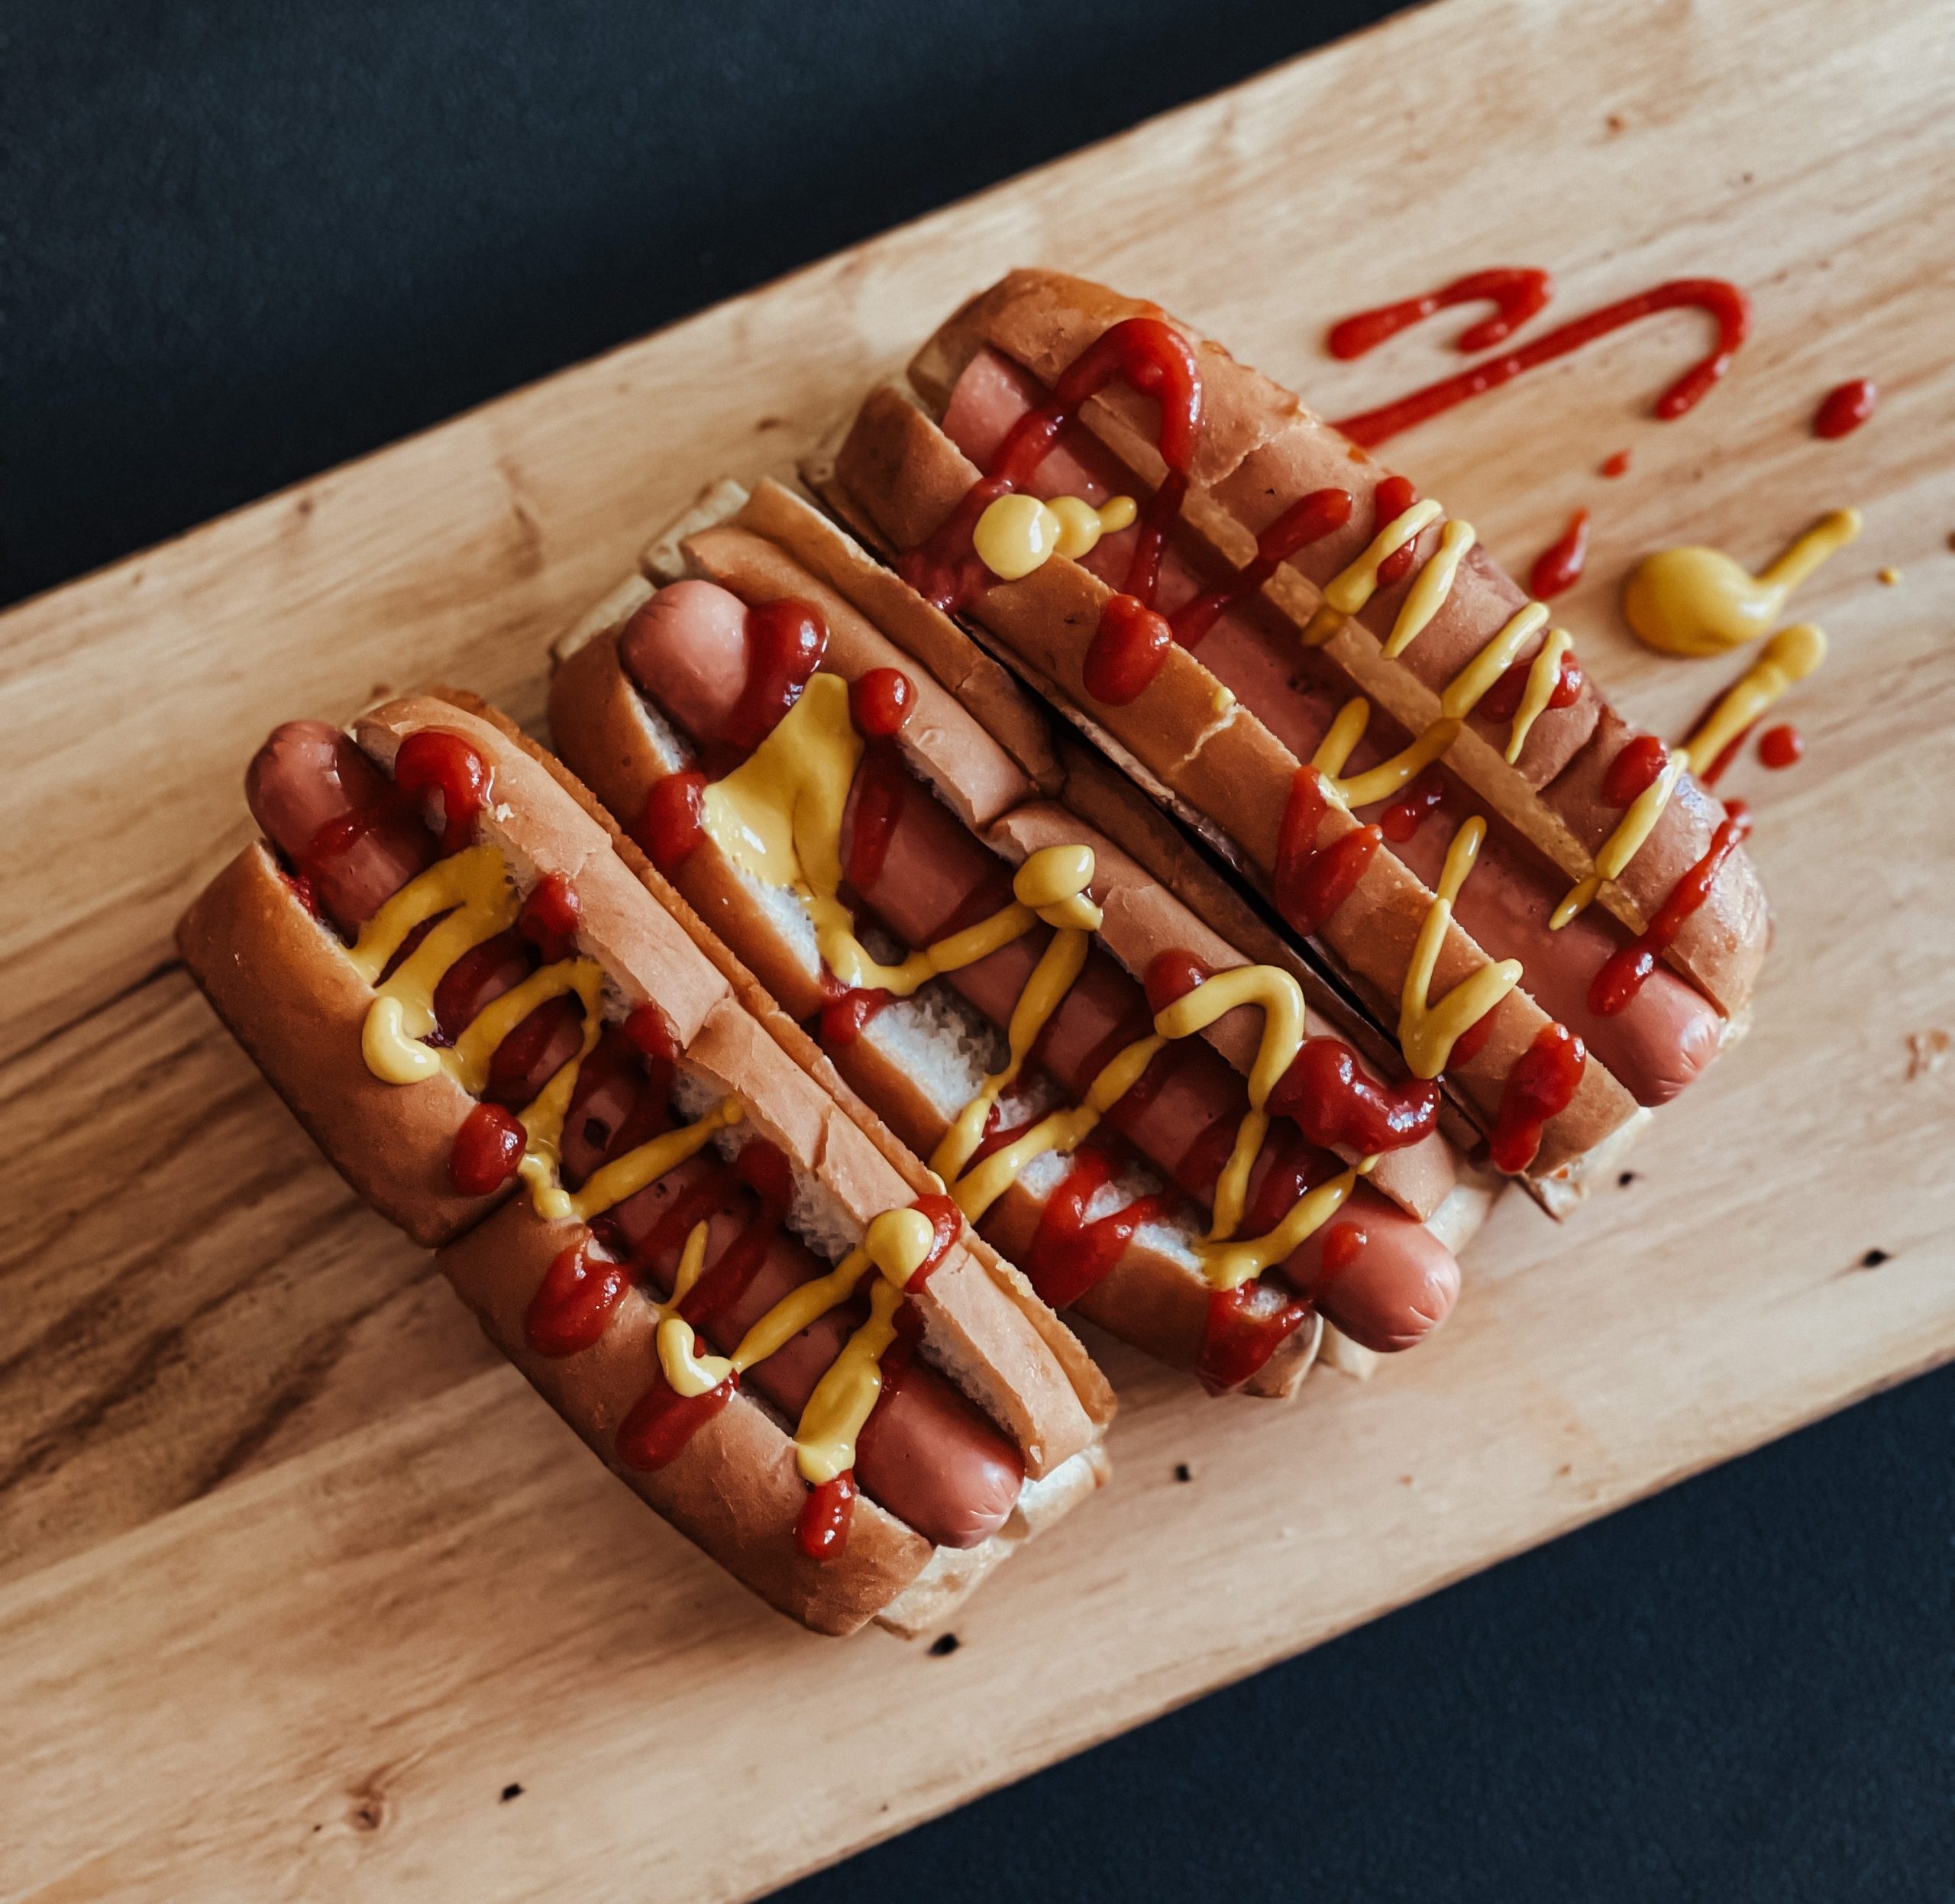 Hot-dogs-3-scaled-aspect-ratio-264-257